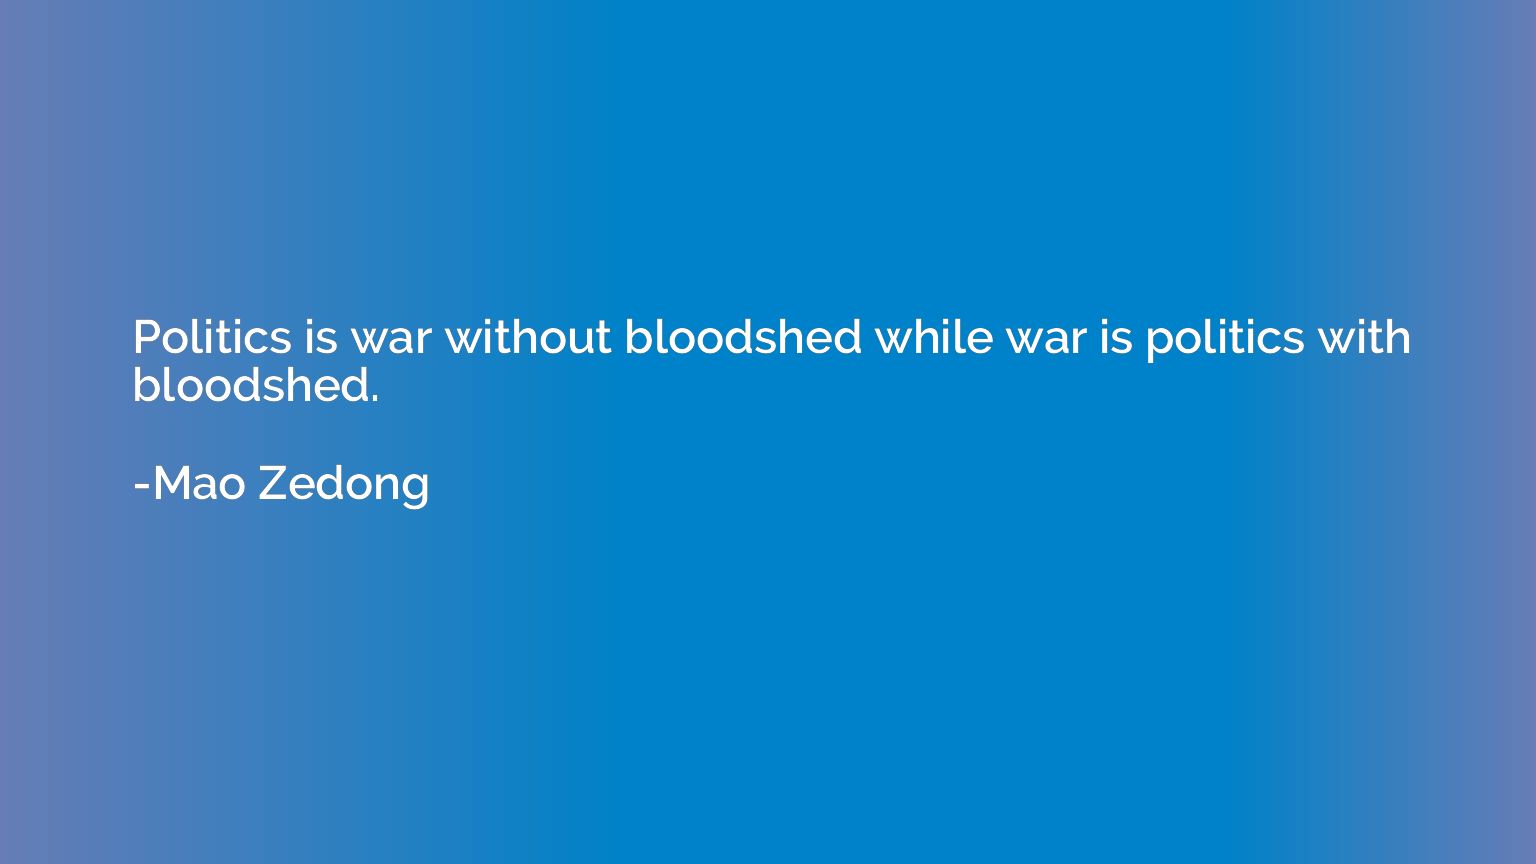 Politics is war without bloodshed while war is politics with